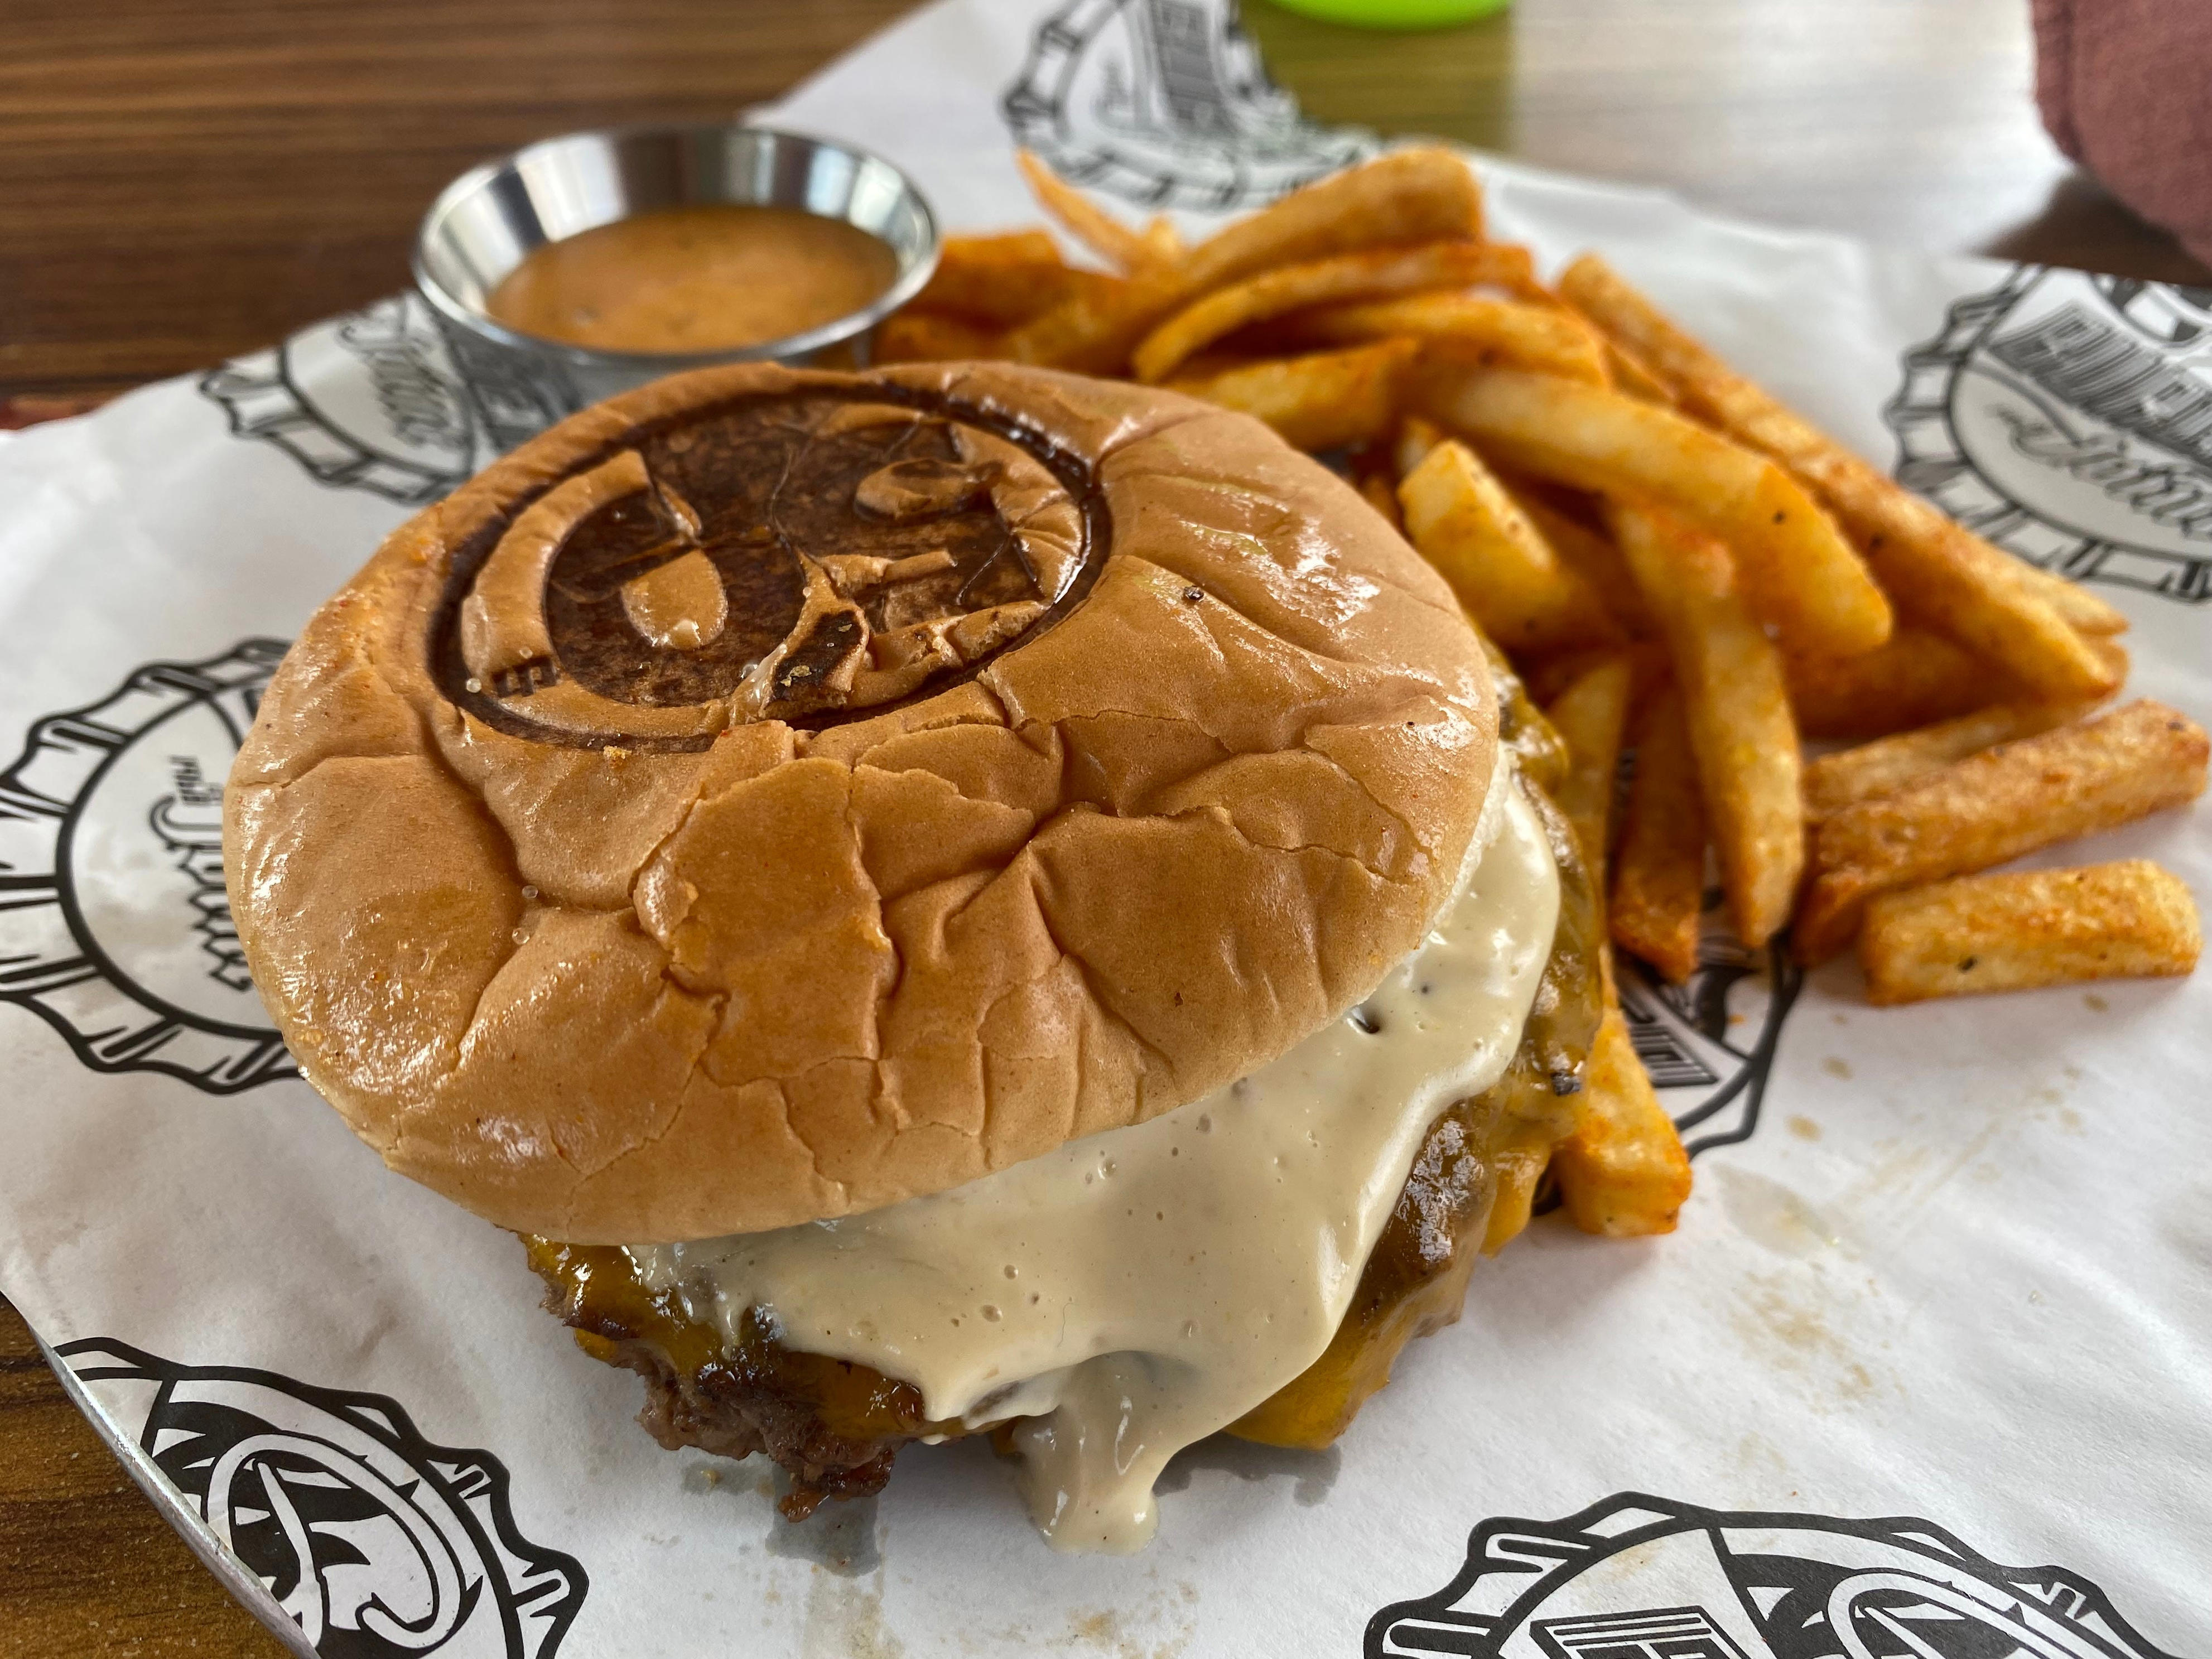 <p>I was excited to try the Straight Up burger, which had the same toasted bun and smashed burger patty as the Pig Patty. </p><p>The toppings were supposed to include cheese, lettuce, tomato, onion, pickle, and a generous slathering of Donkey Sauce (Fieri's signature garlic aioli). </p><p>When I got the Straight Up burger, it didn't have lettuce, tomatoes, or pickles, but it didn't really need them. The Donkey Sauce and cheese added plenty of flavor.</p>